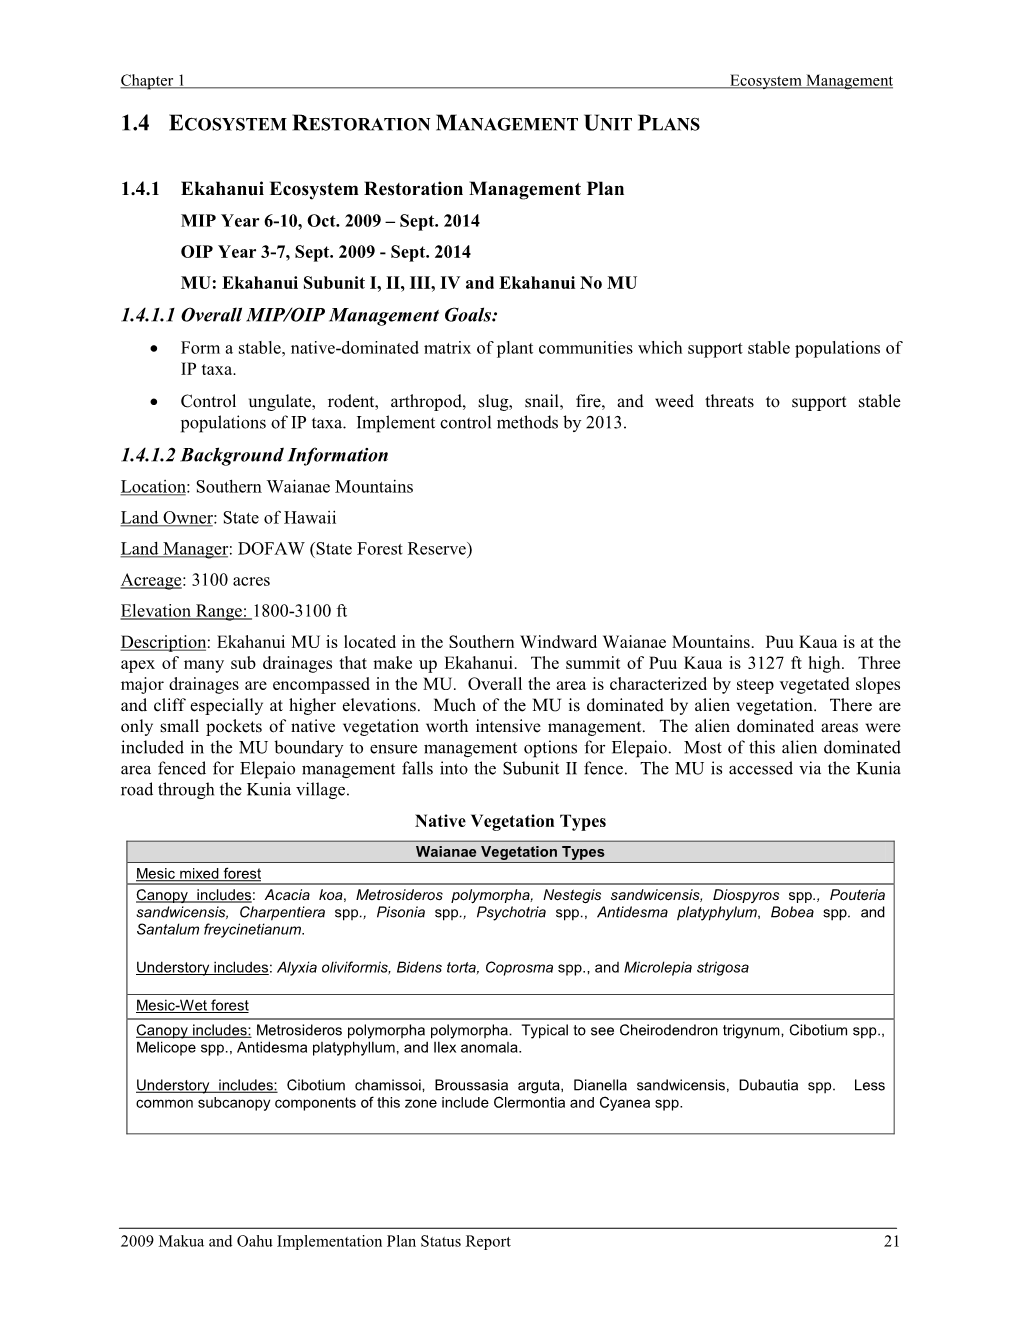 2009 Status Report for the Makua and Oahu Implementation Plans